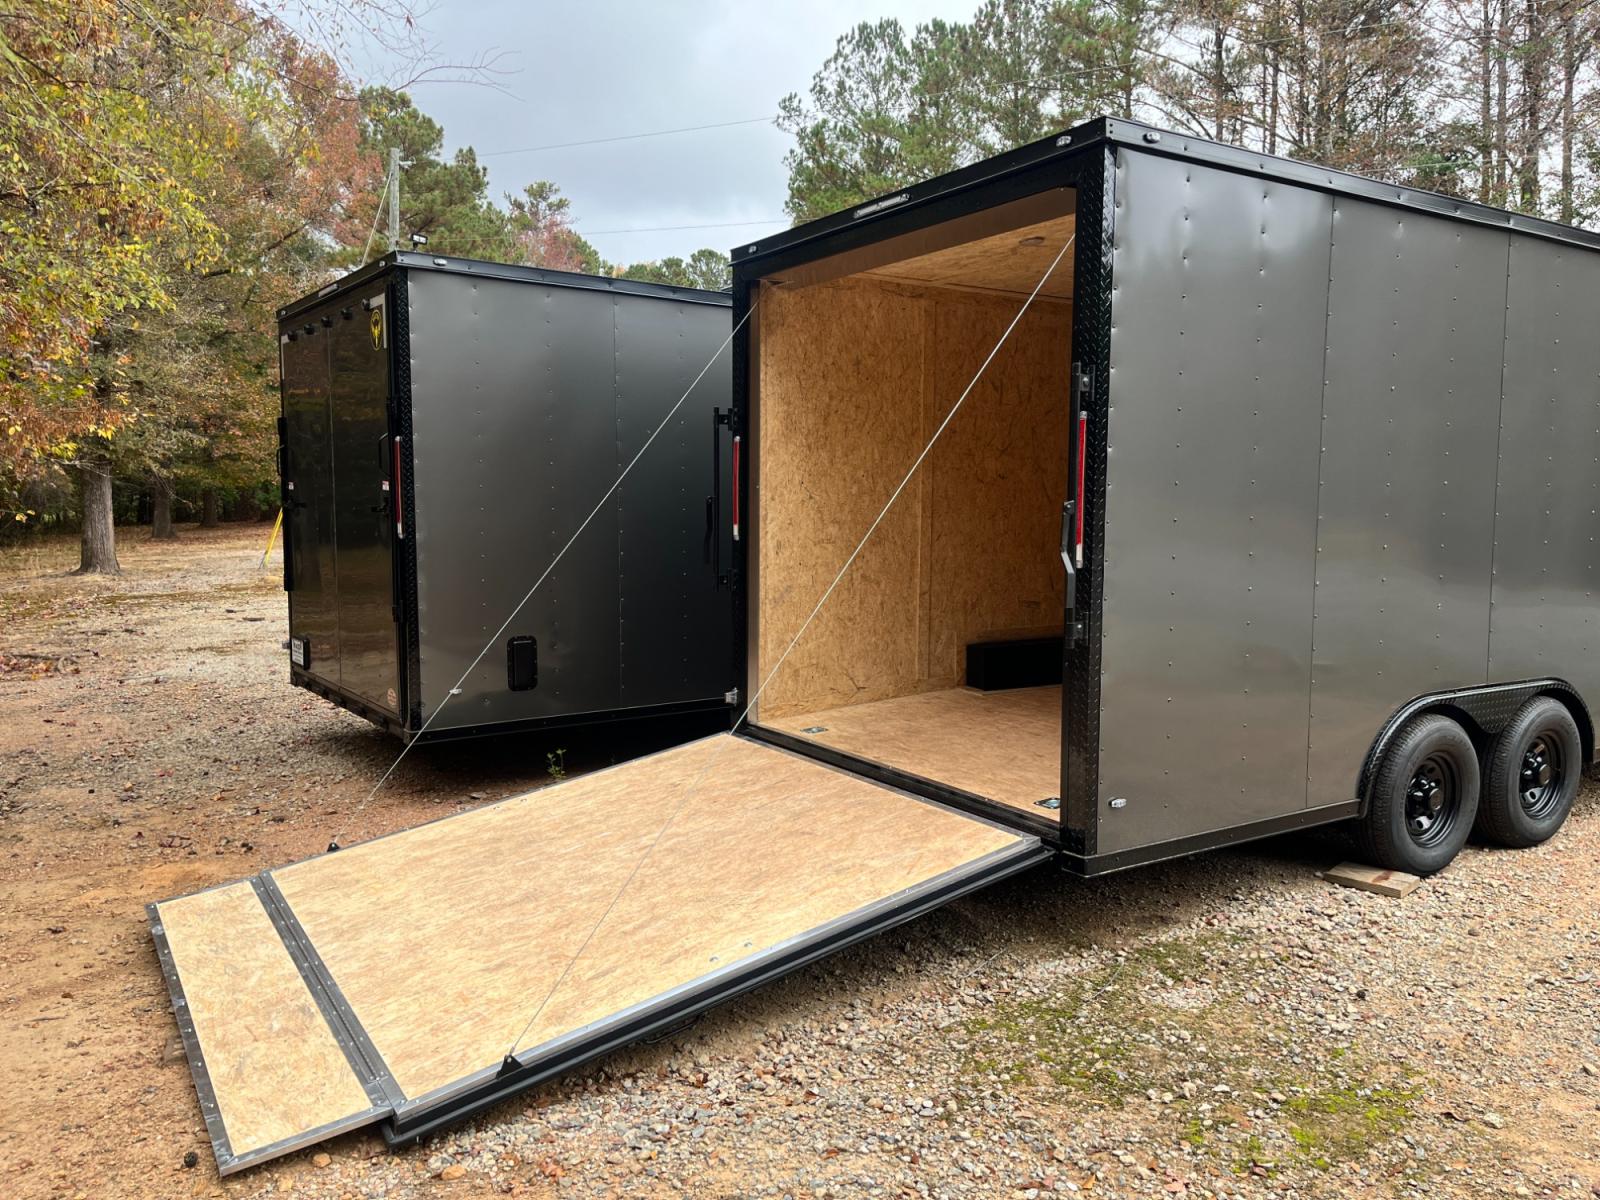 2023 .080 Charcoal Metallic w/Black Out Pkg. Elite Cargo 8.5ft X 20ft Tandem , located at 1330 Rainey Rd., Macon, 31220, (478) 960-1044, 32.845638, -83.778687 - 8.5ft X 20ft Tandem Enclosed Cargo Trailer! Made by Elite Trailers, in Tifton, Ga! This is the Best Quality Trailer Built Today! .080 Thick Charcoal Metallic Skin, with the Black Out Pkg Trim! One Piece Rubber Roof, on top of 7/16" Thick Stable Deck, for a Super Strong Roof! This Roof, Makes i - Photo #12